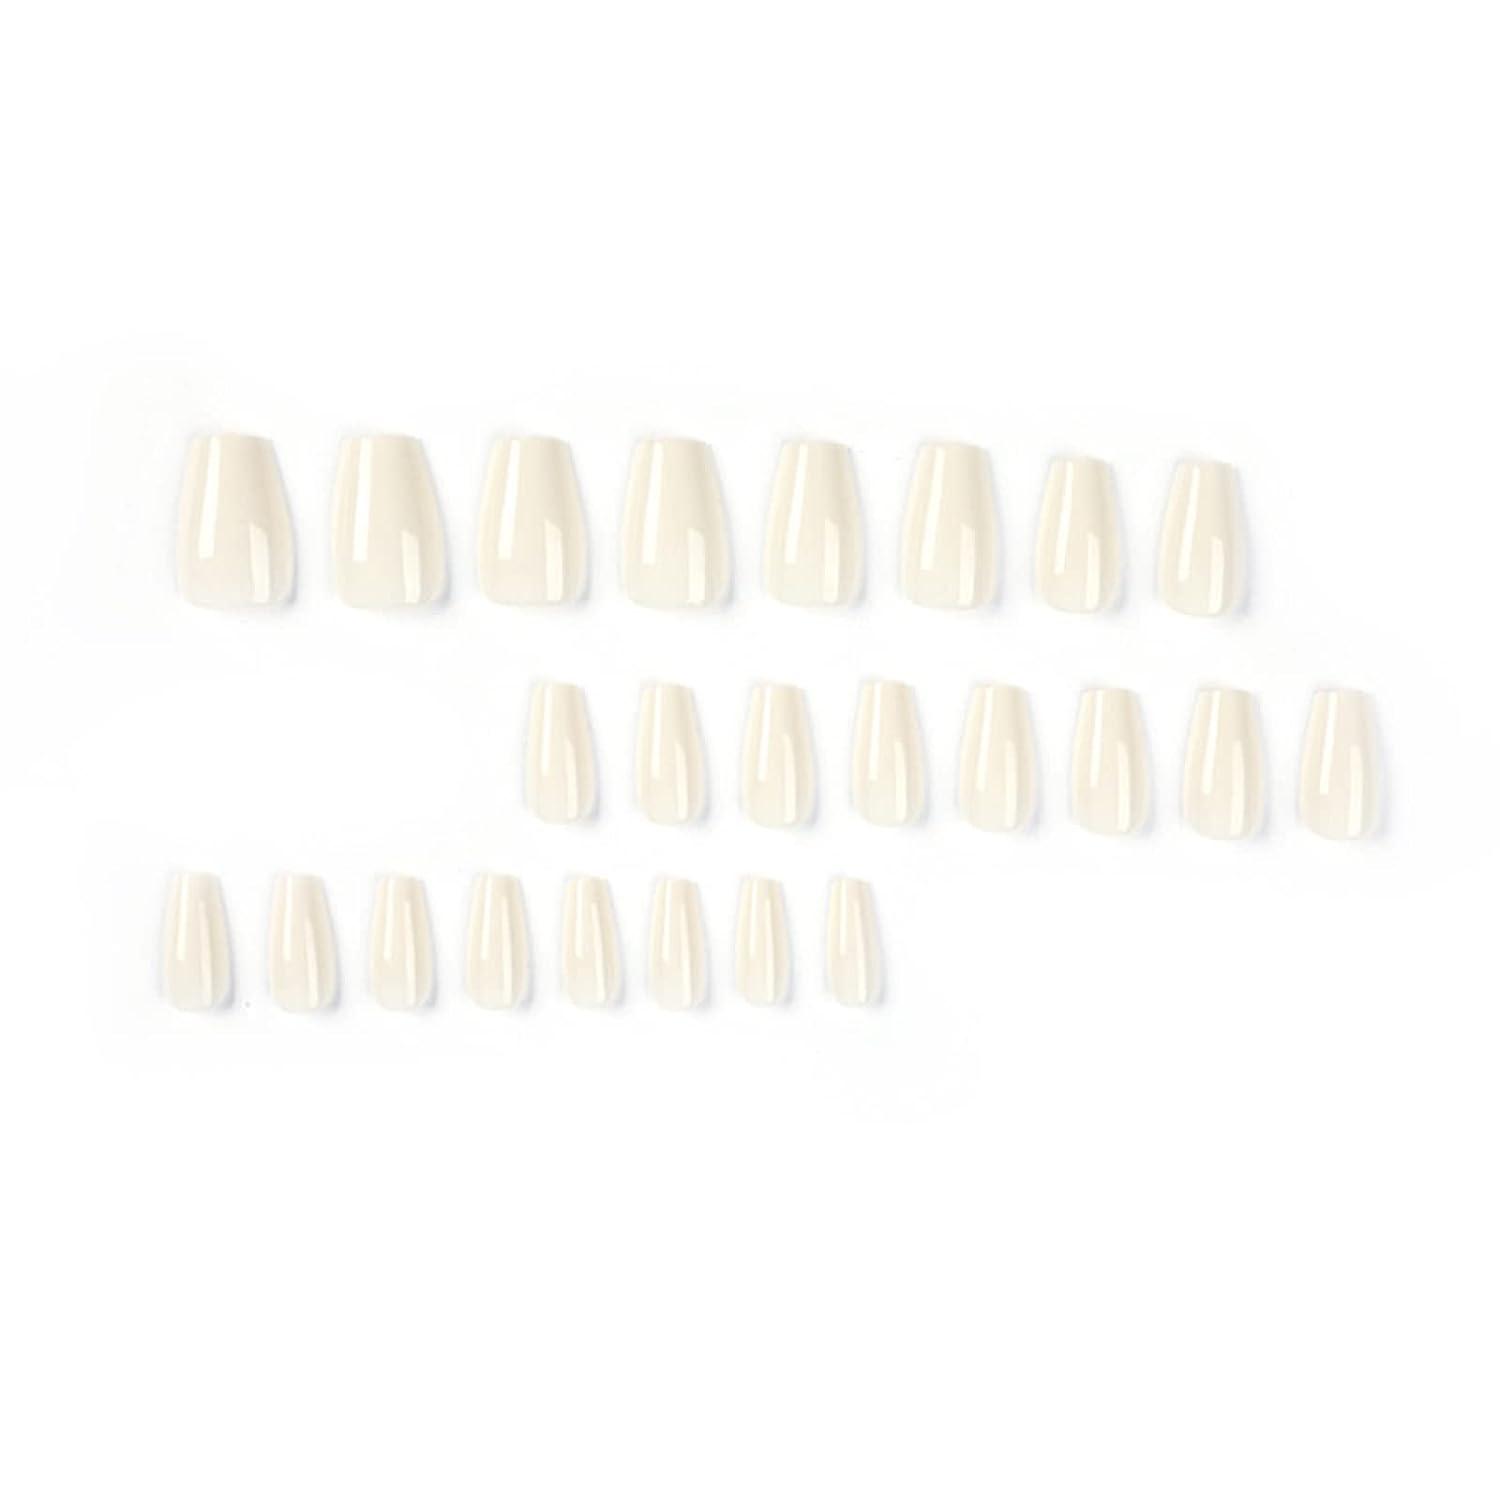 QINGGE White Press on Nails Medium Length Coffin Fake Nails Solid Color  Stick on Nails Glue on Nails Glossy Acrylic Nails False Nails for Women  24Pcs A1 Solid White